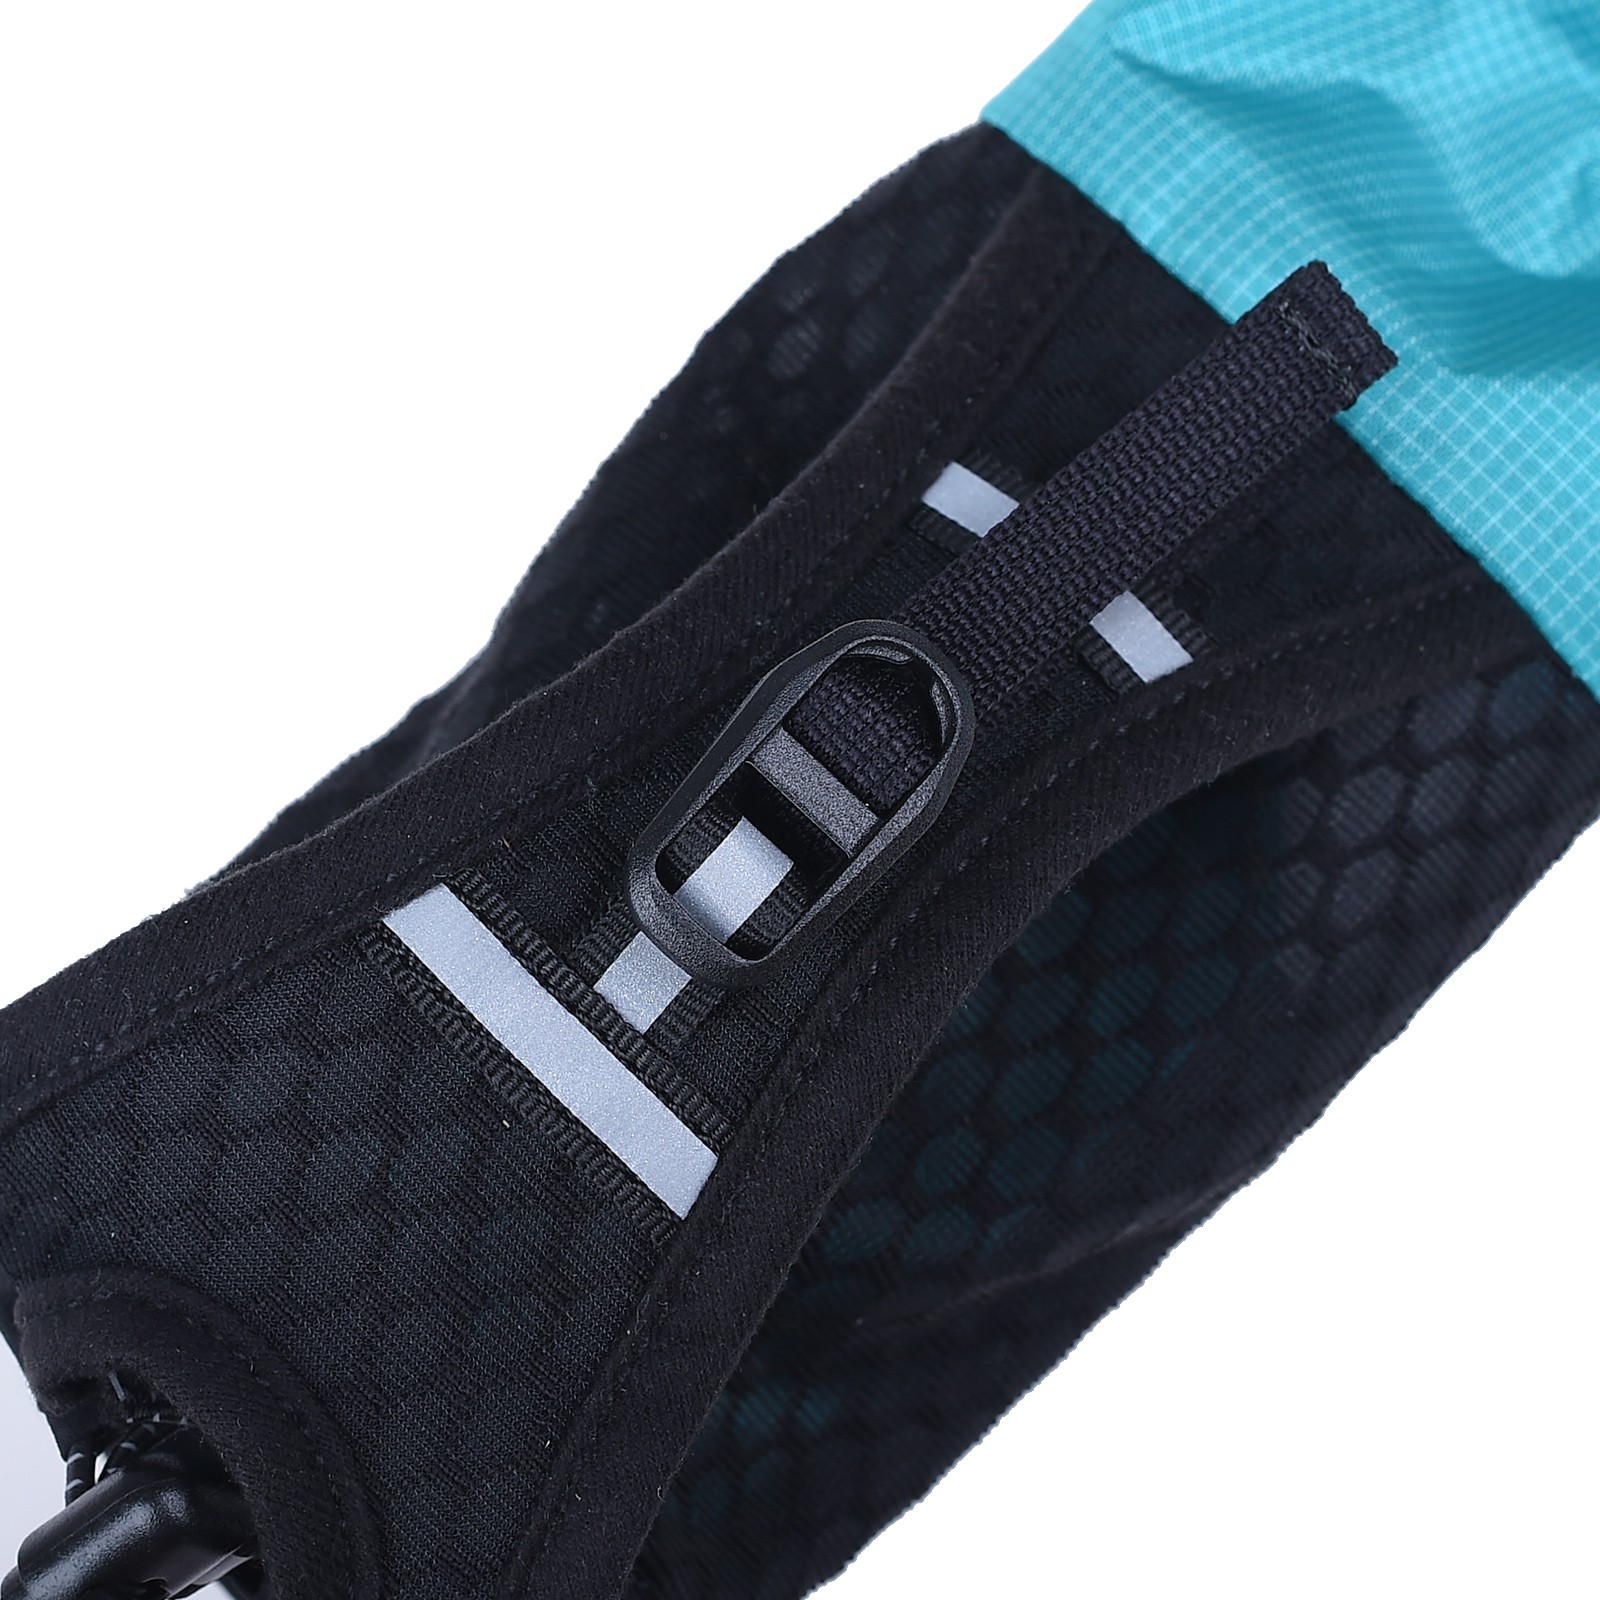 Wholesale AONIJIE A7106 Sports Insulated Water Bottle Carrier Holder Bag Running Case Pouch Cover with Adjustable Shoulder Strap